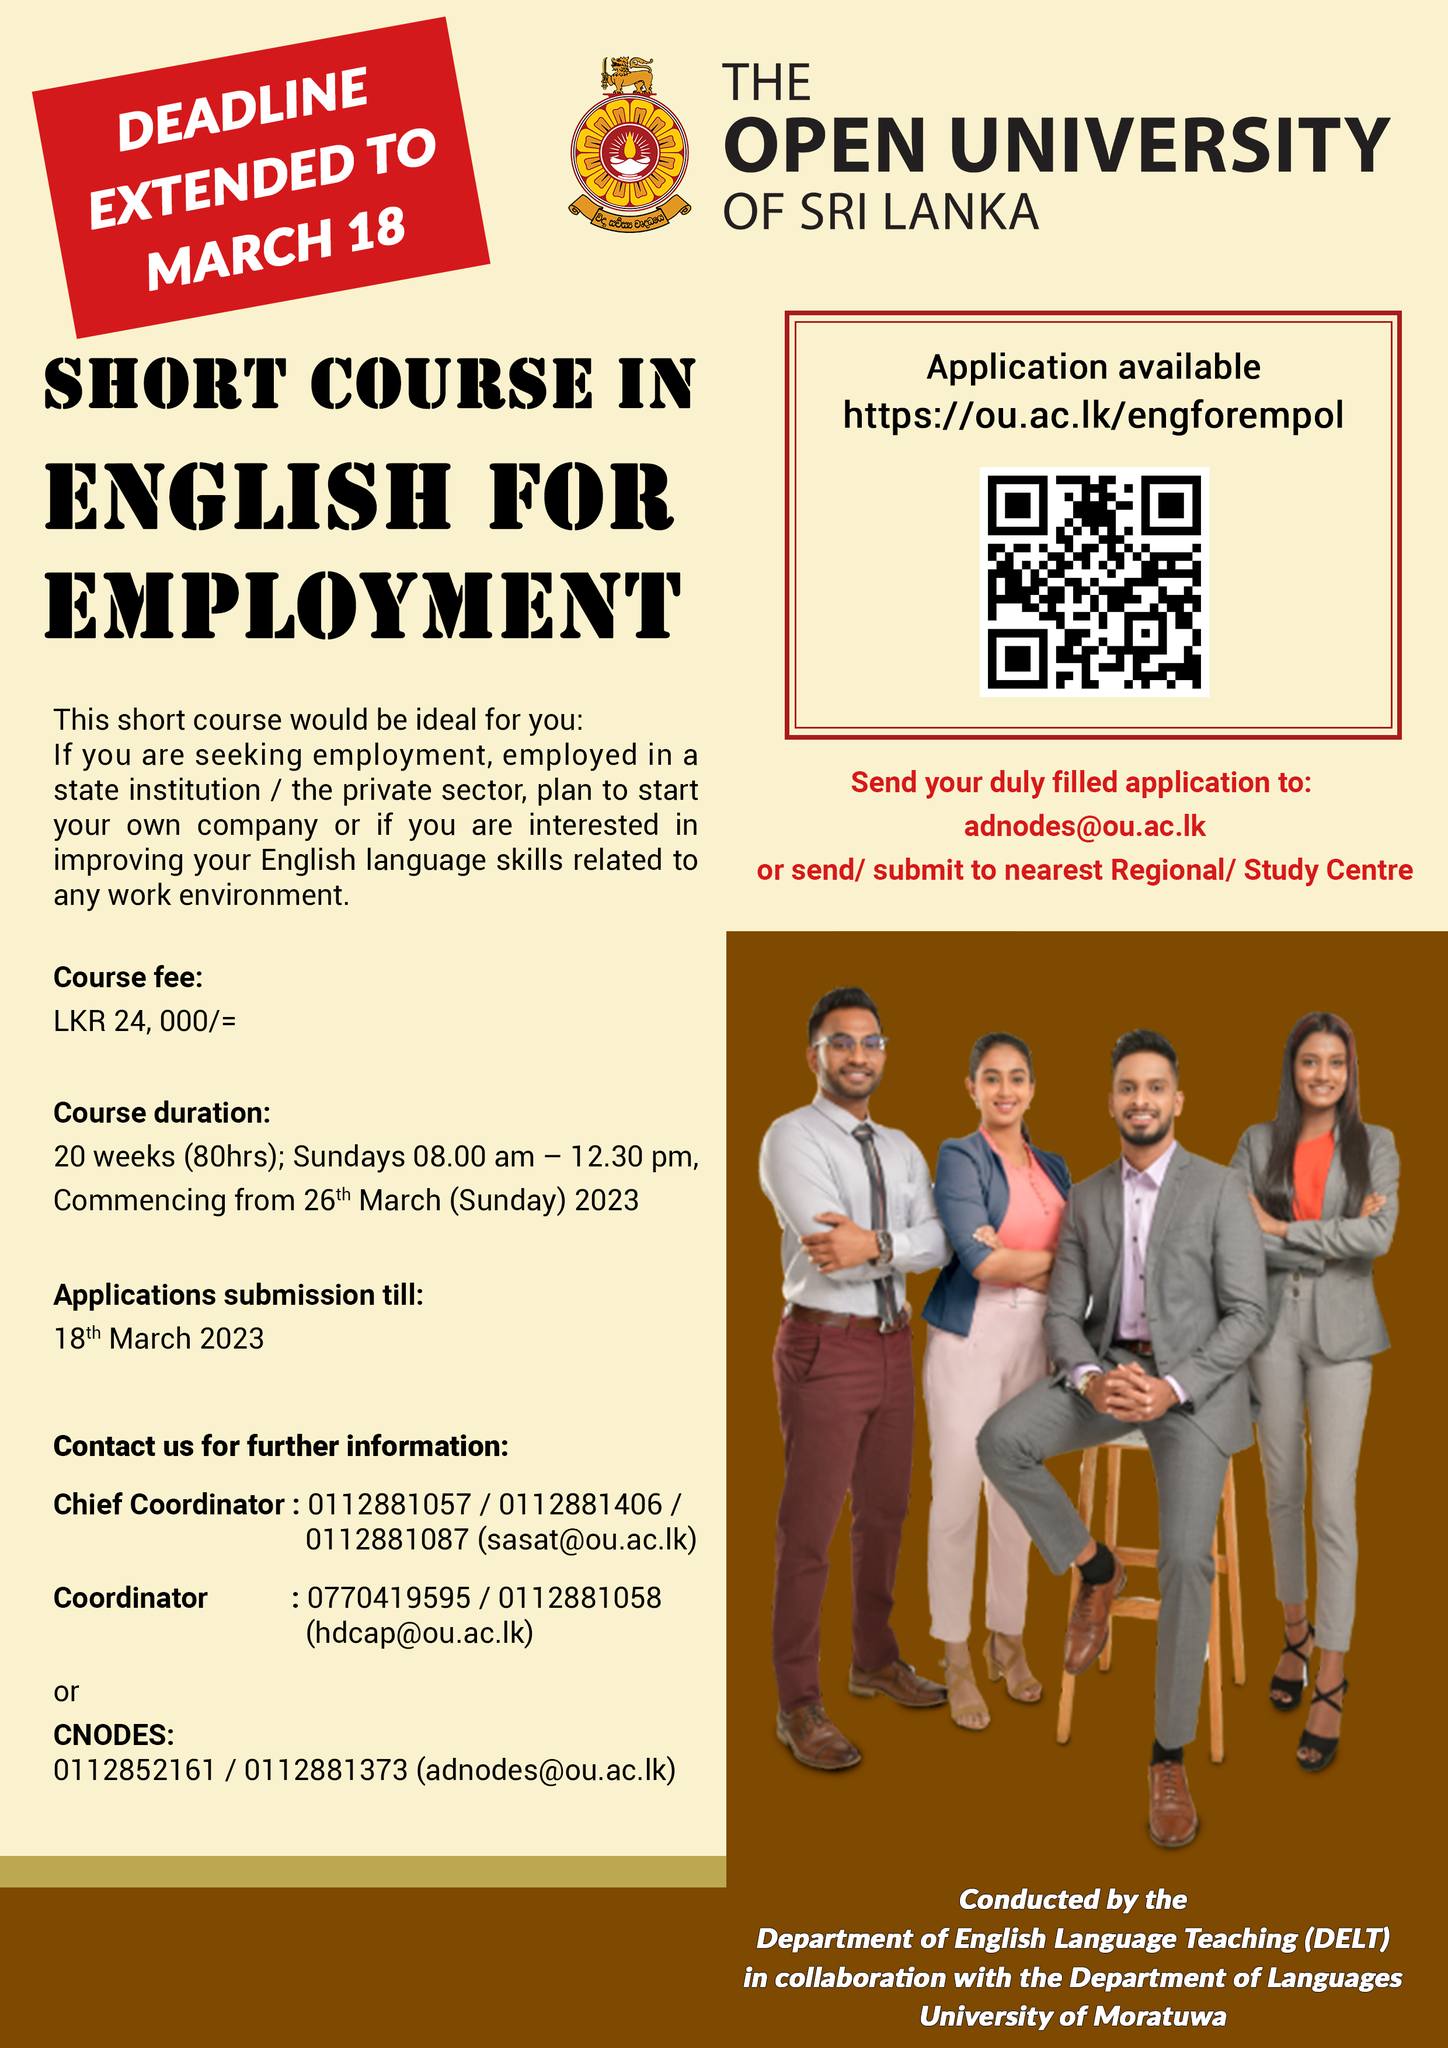 Short Course in English for Employment 2023 - Open University of Sri Lanka